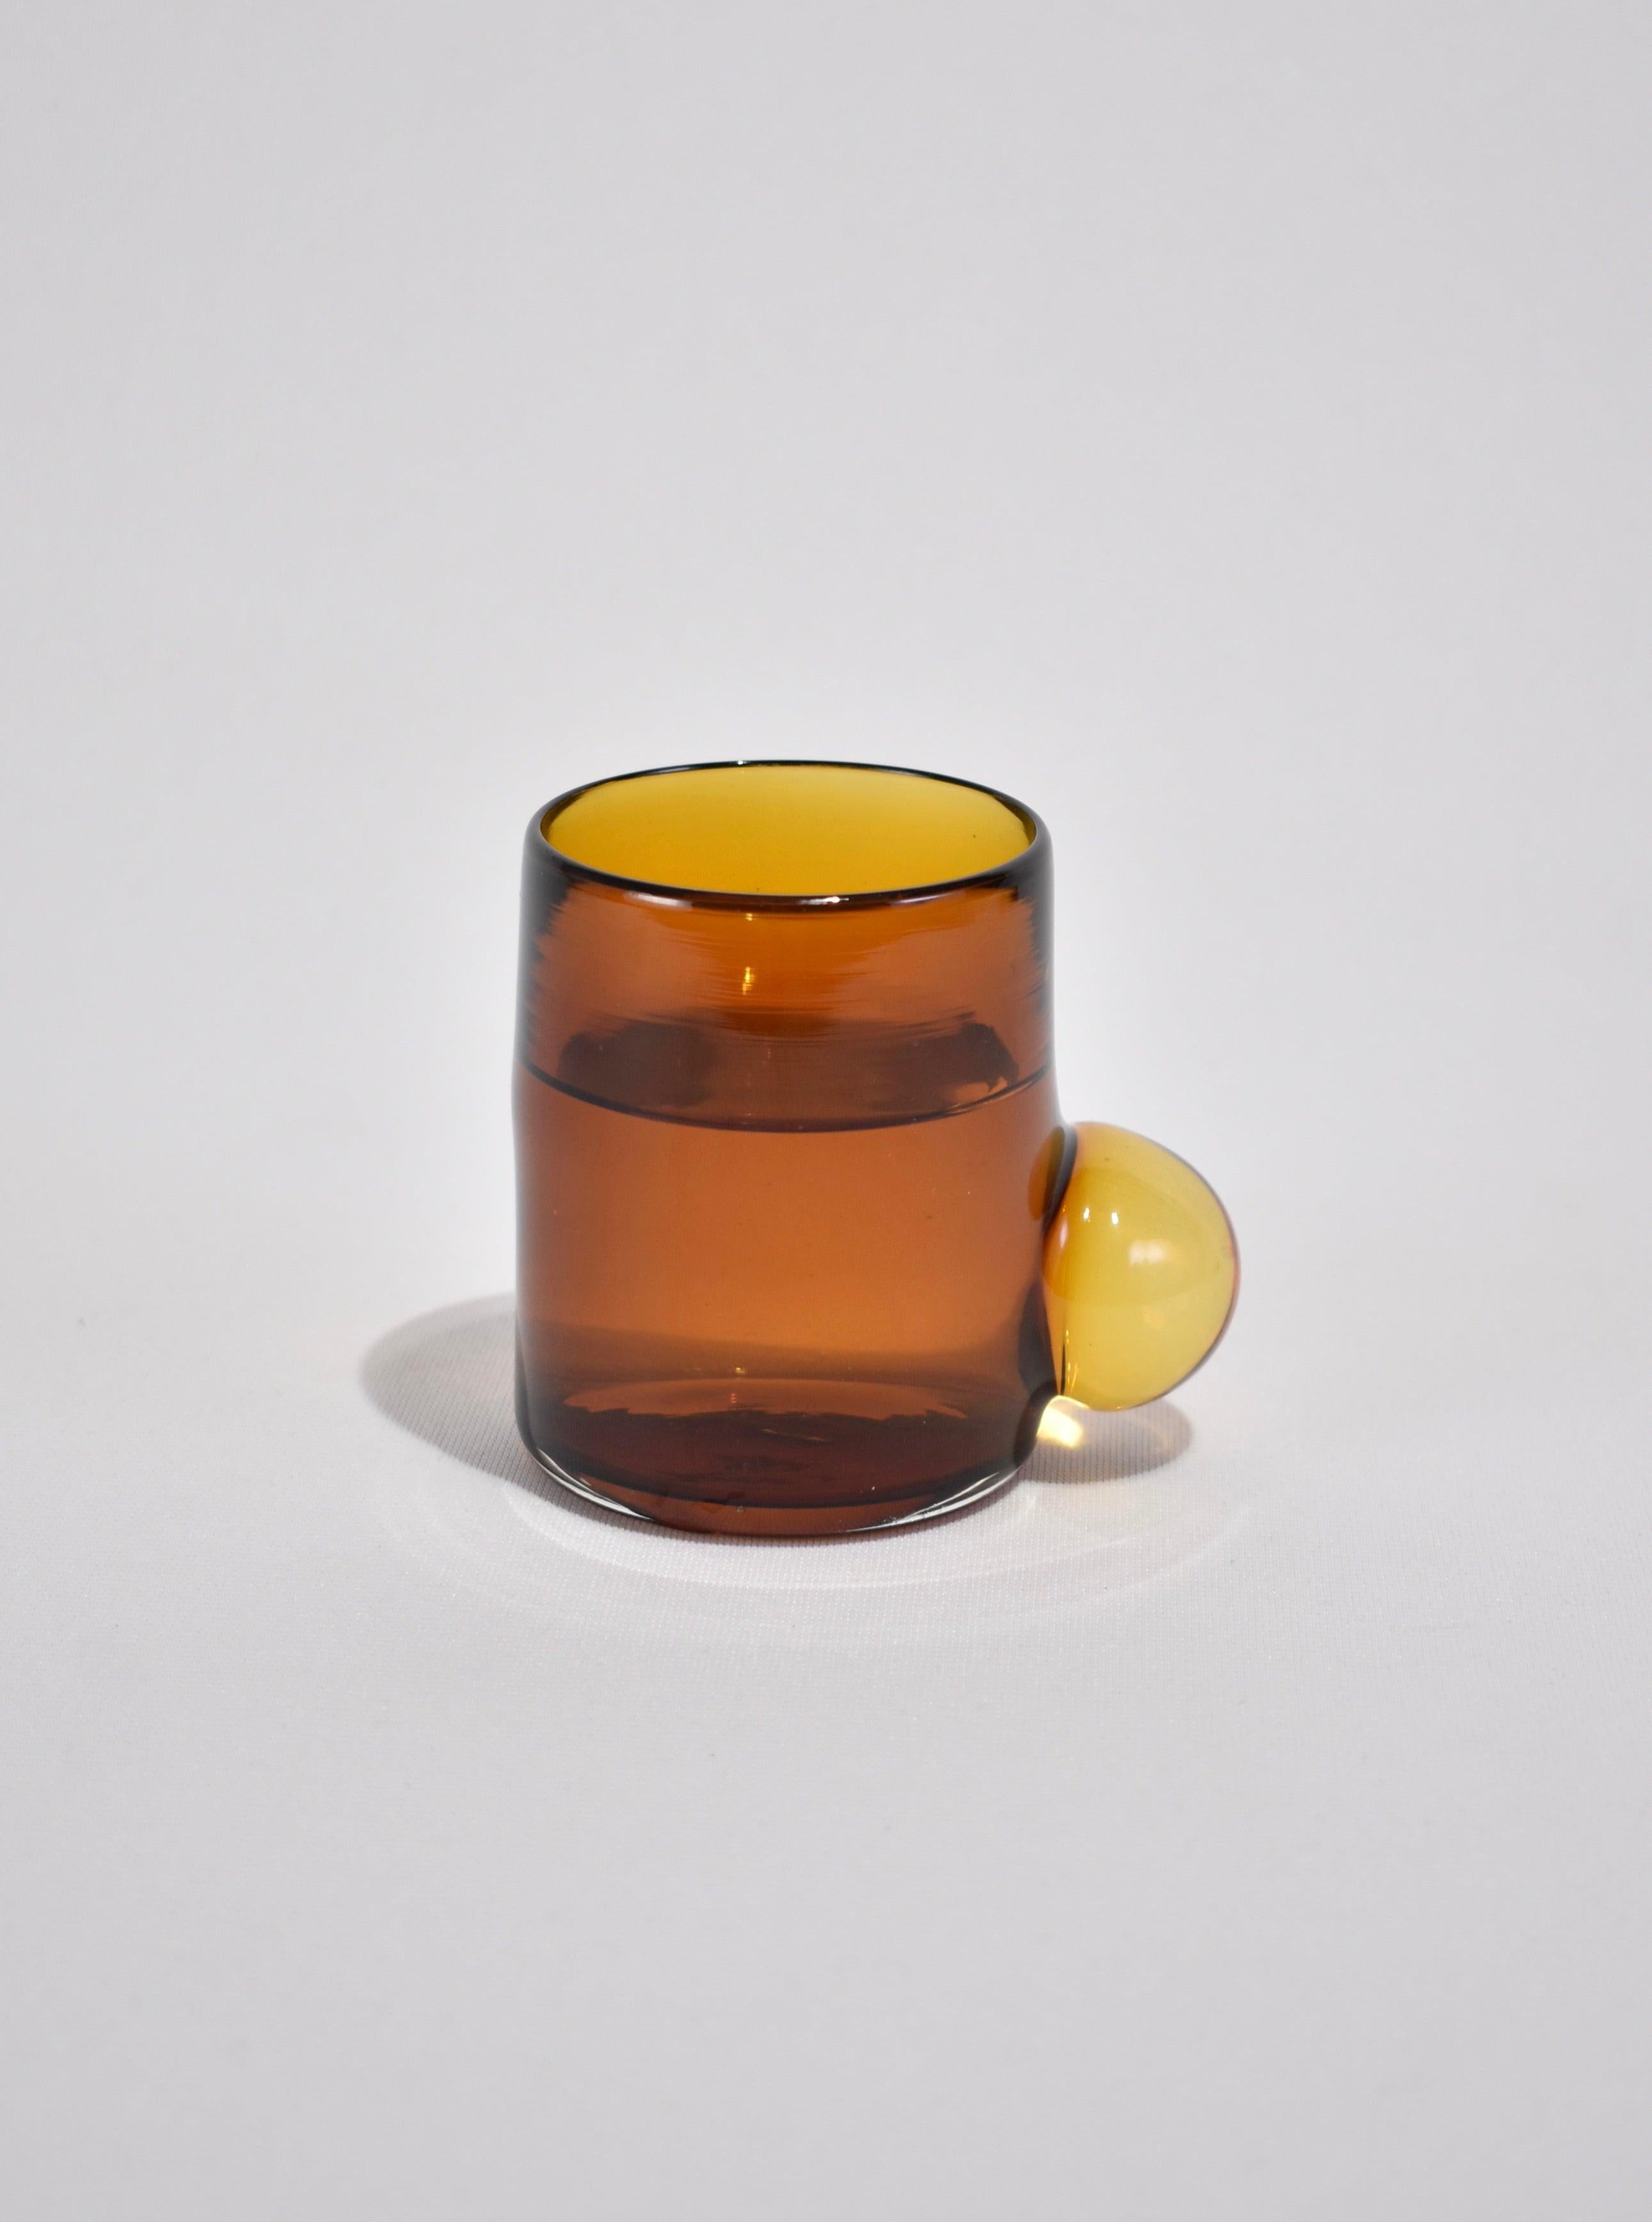 Blown glass tumbler in amber with a clear bubble handle. Perfect size for water, wine, juice, or spirits. Handmade in USA by Grace Whiteside of Sticky Glass.

Please note: Due to the handmade nature of this cup, subtle variations in form and